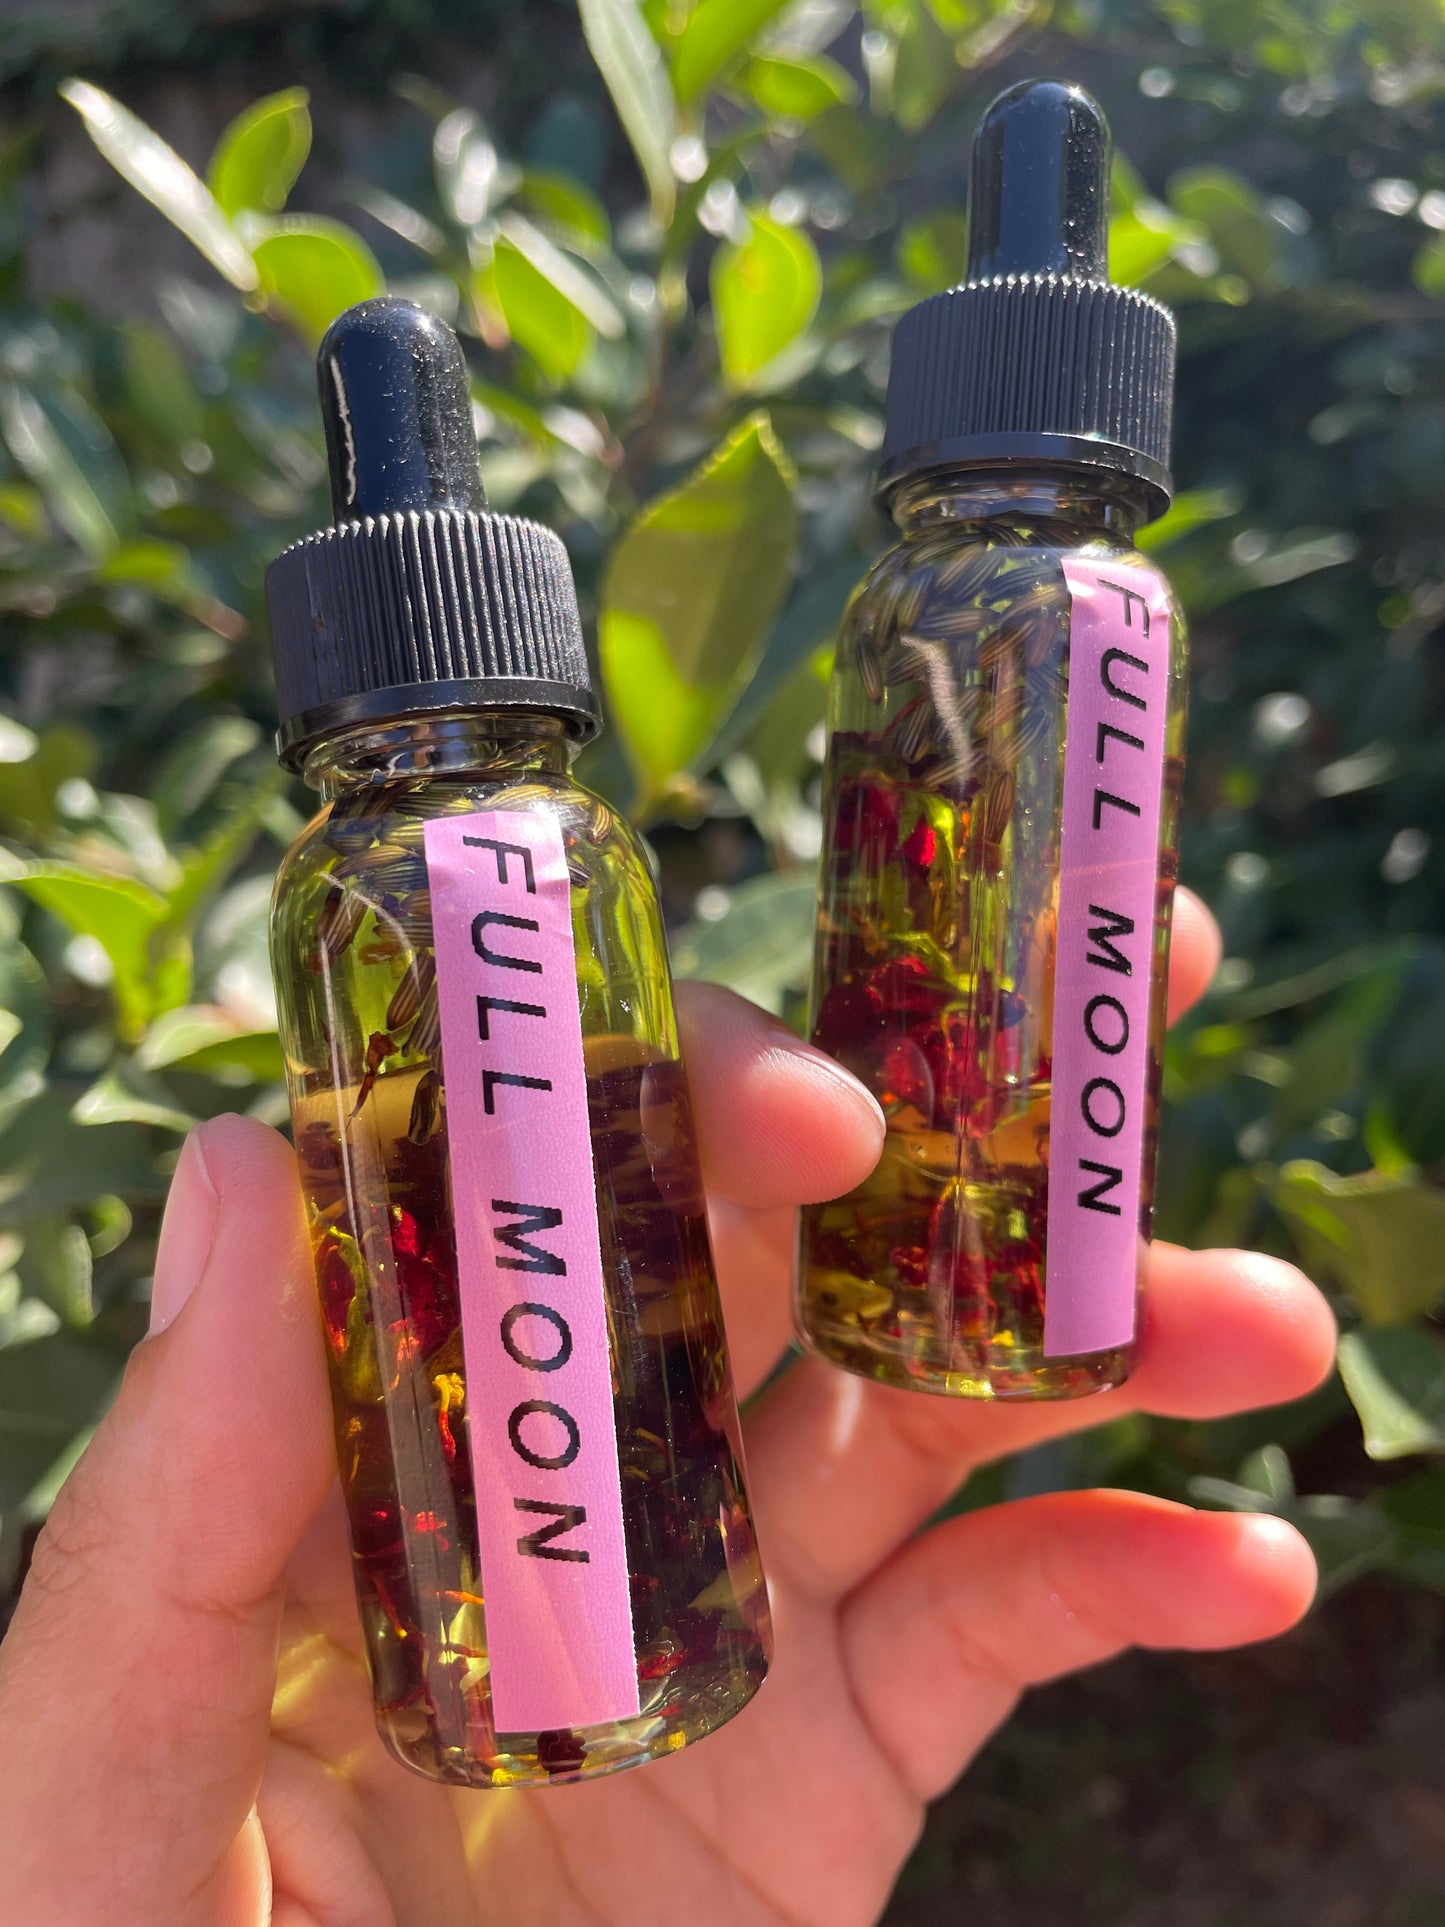 FULL MOON Intention Oil & Spray | Fragrant Body Oil made with Homegrown Botanicals